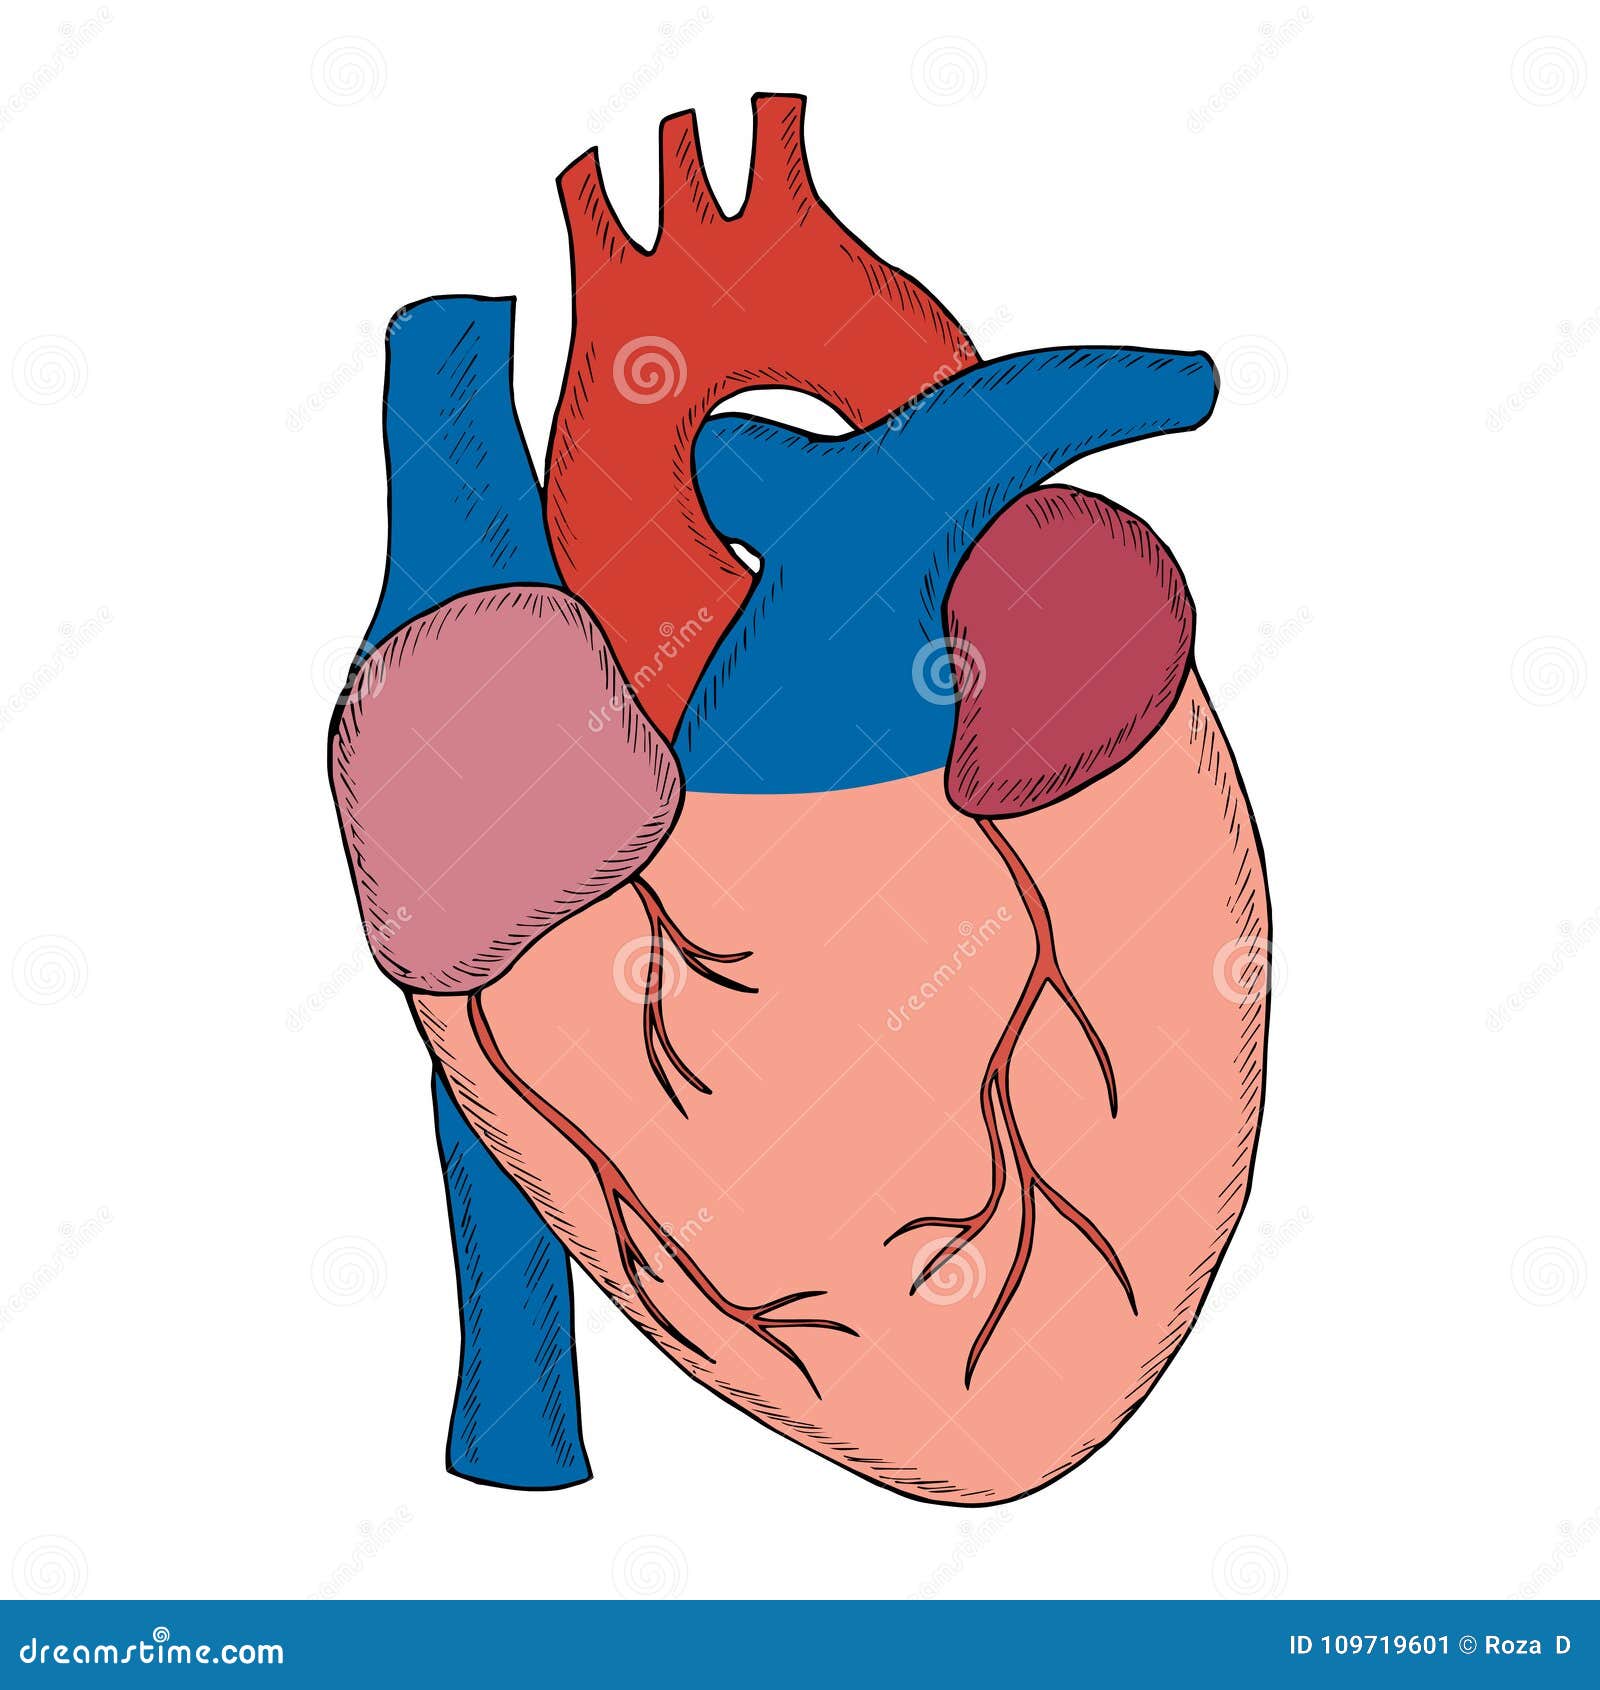 How To Draw Human Heart In Simple Steps-saigonsouth.com.vn